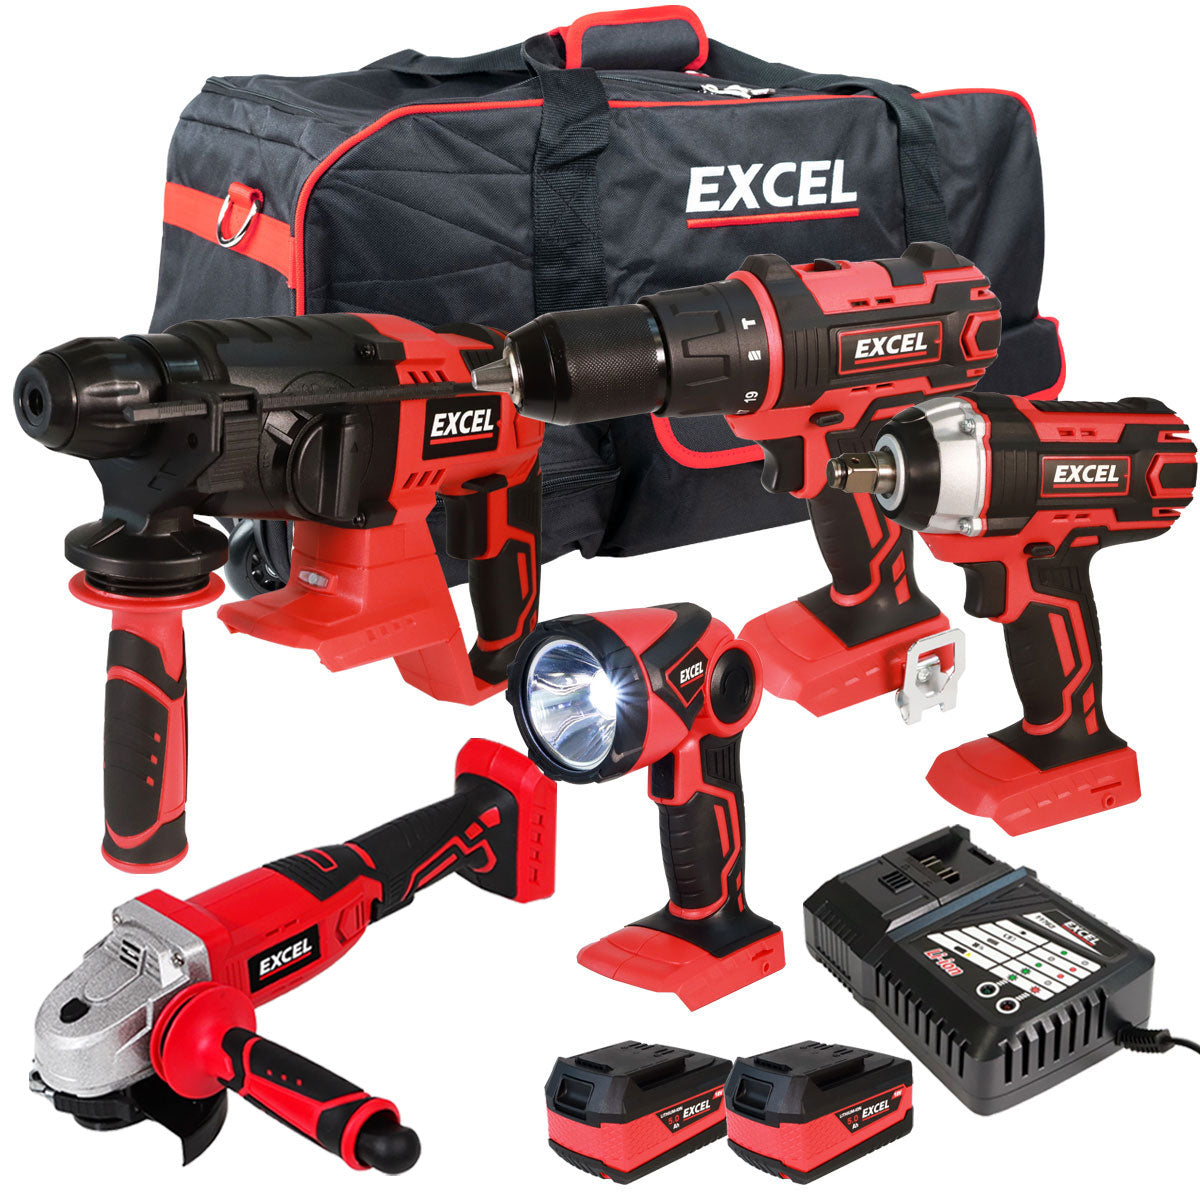 Excel 18V 5 Piece Cordless Power Tool Kit with 2 x 5.0Ah Batteries Smart Charger & 26